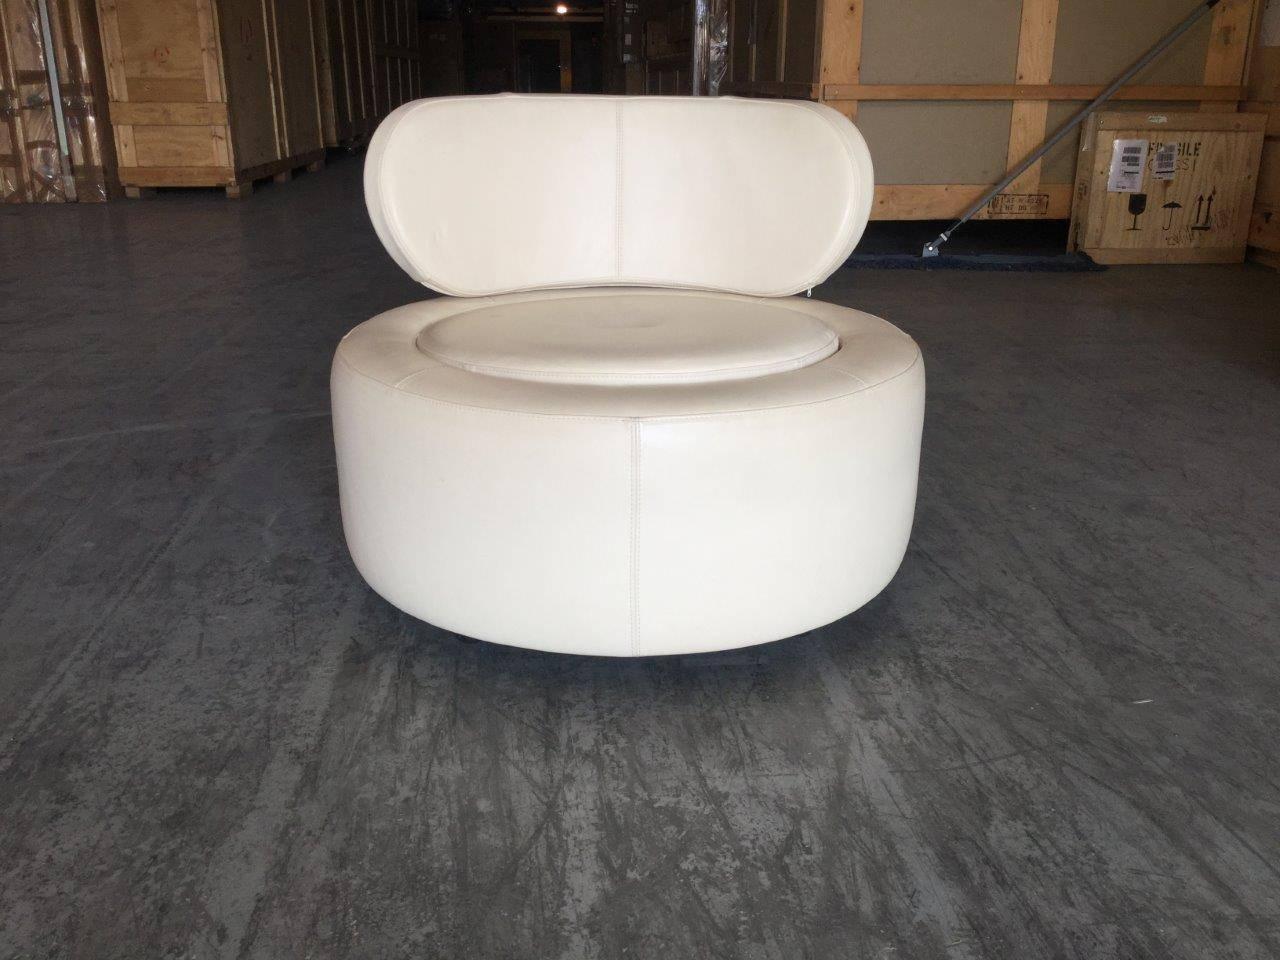 Pair of Danish modern white leather chairs. Made in Denmark, this extraordinary pair of large, round leather chairs are in mint condition. Both comfortable and functional, these chairs feature a couture design form and beautiful detailed stitching.